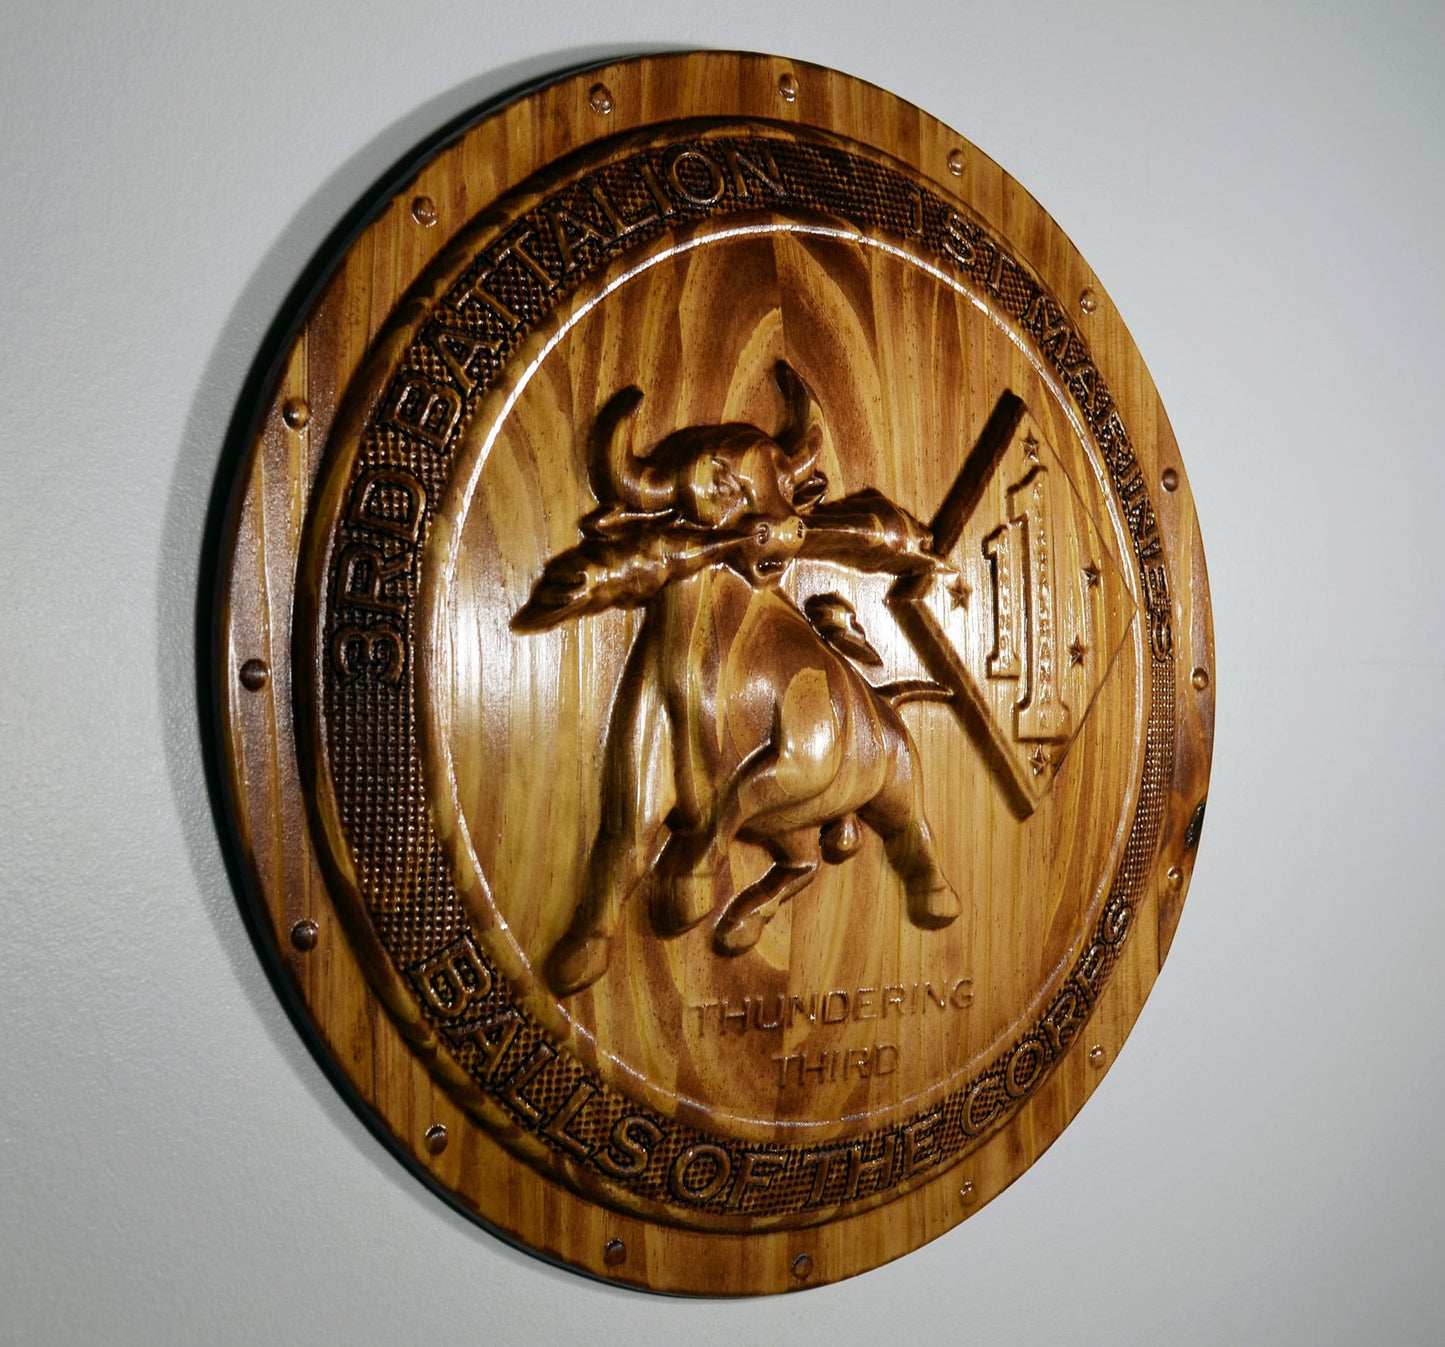 USMC 3rd Battalion 1st Marines, Thundering Third, Marine Corps, 3d wood carving, military plaque